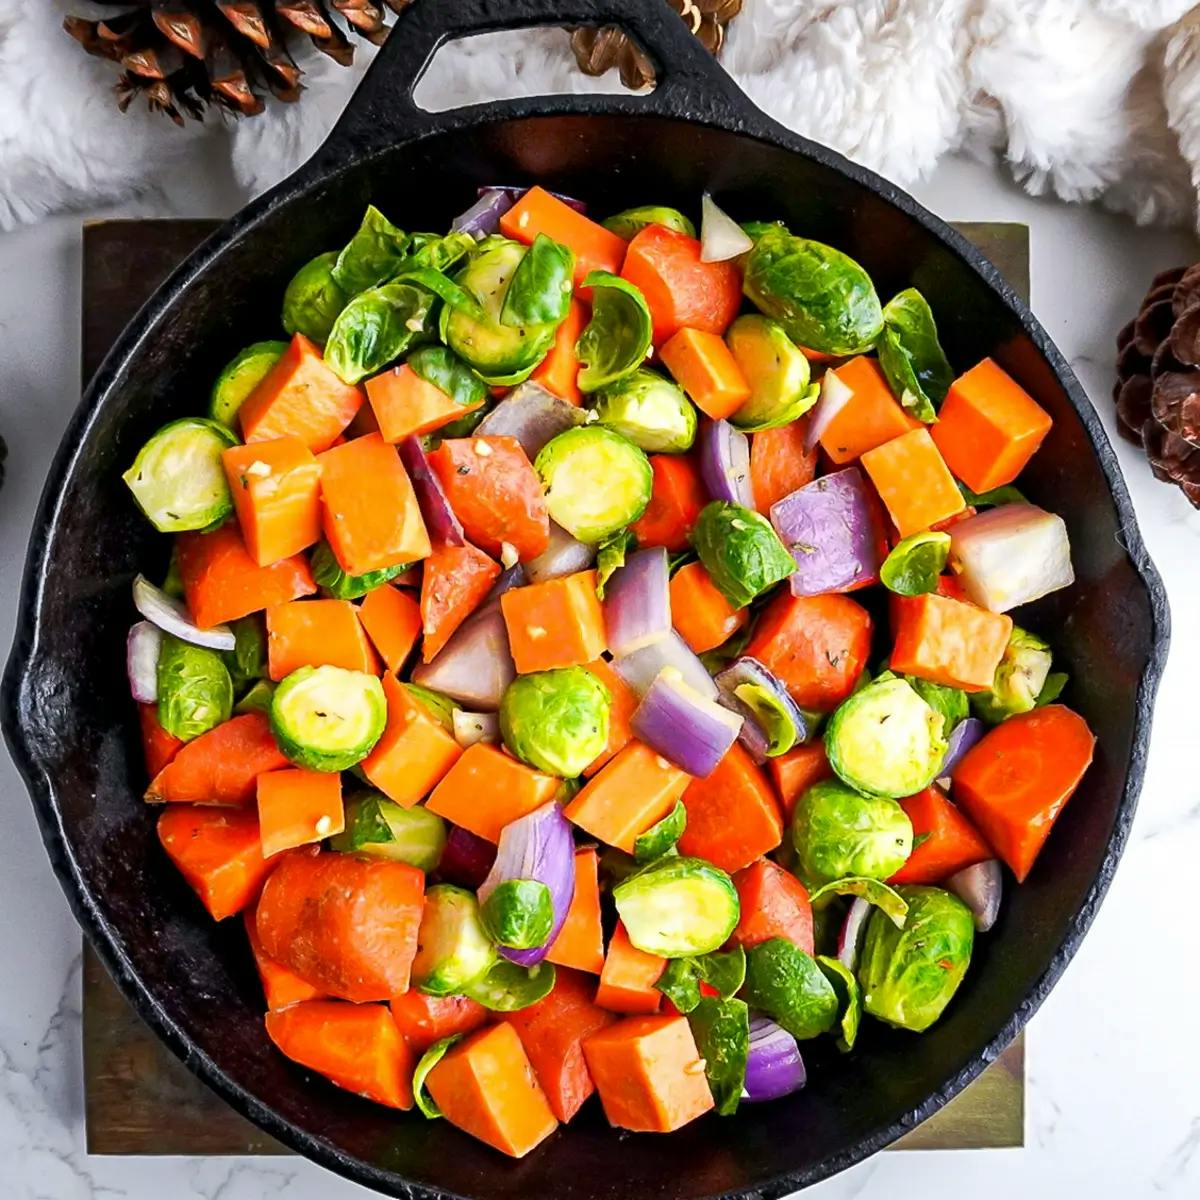 Seasoned mixed vegetables in a skillet, ready to go into the oven.